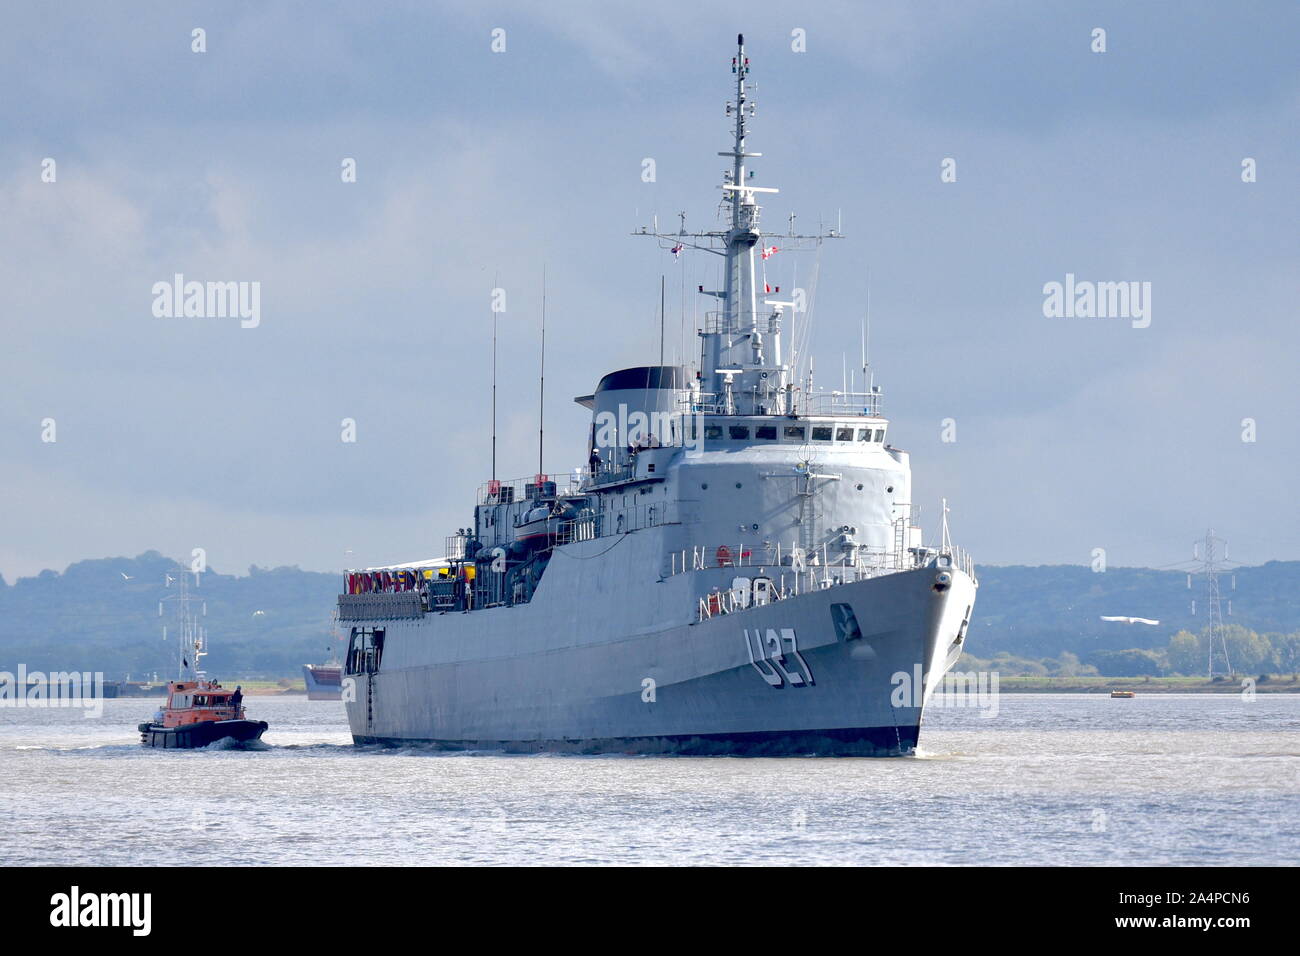 NS Brasil  is a training vessel for officer of the Brazilian Navy and associated maritime academies. The vessel is pictured on the Thames.Thames. Stock Photo